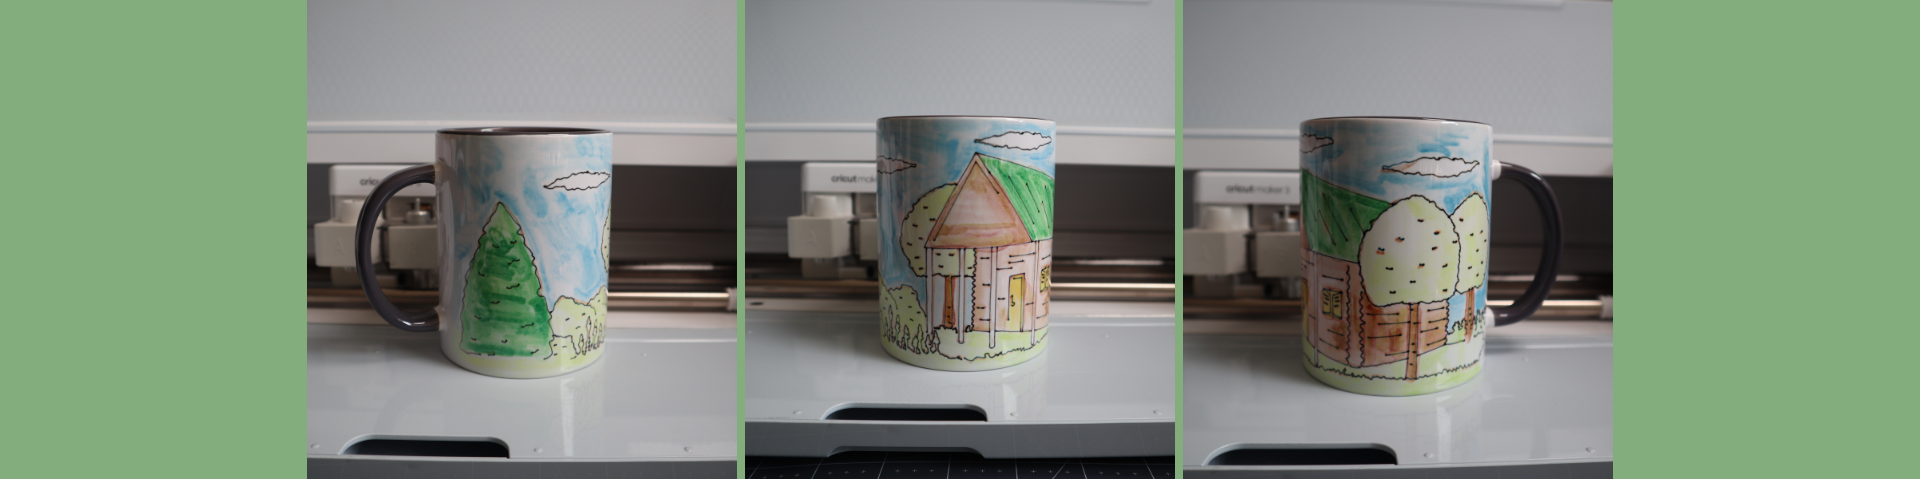 How to Watercolor Paint with Cricut Infusible Ink Markers // Cricut Mug Press Tutorial